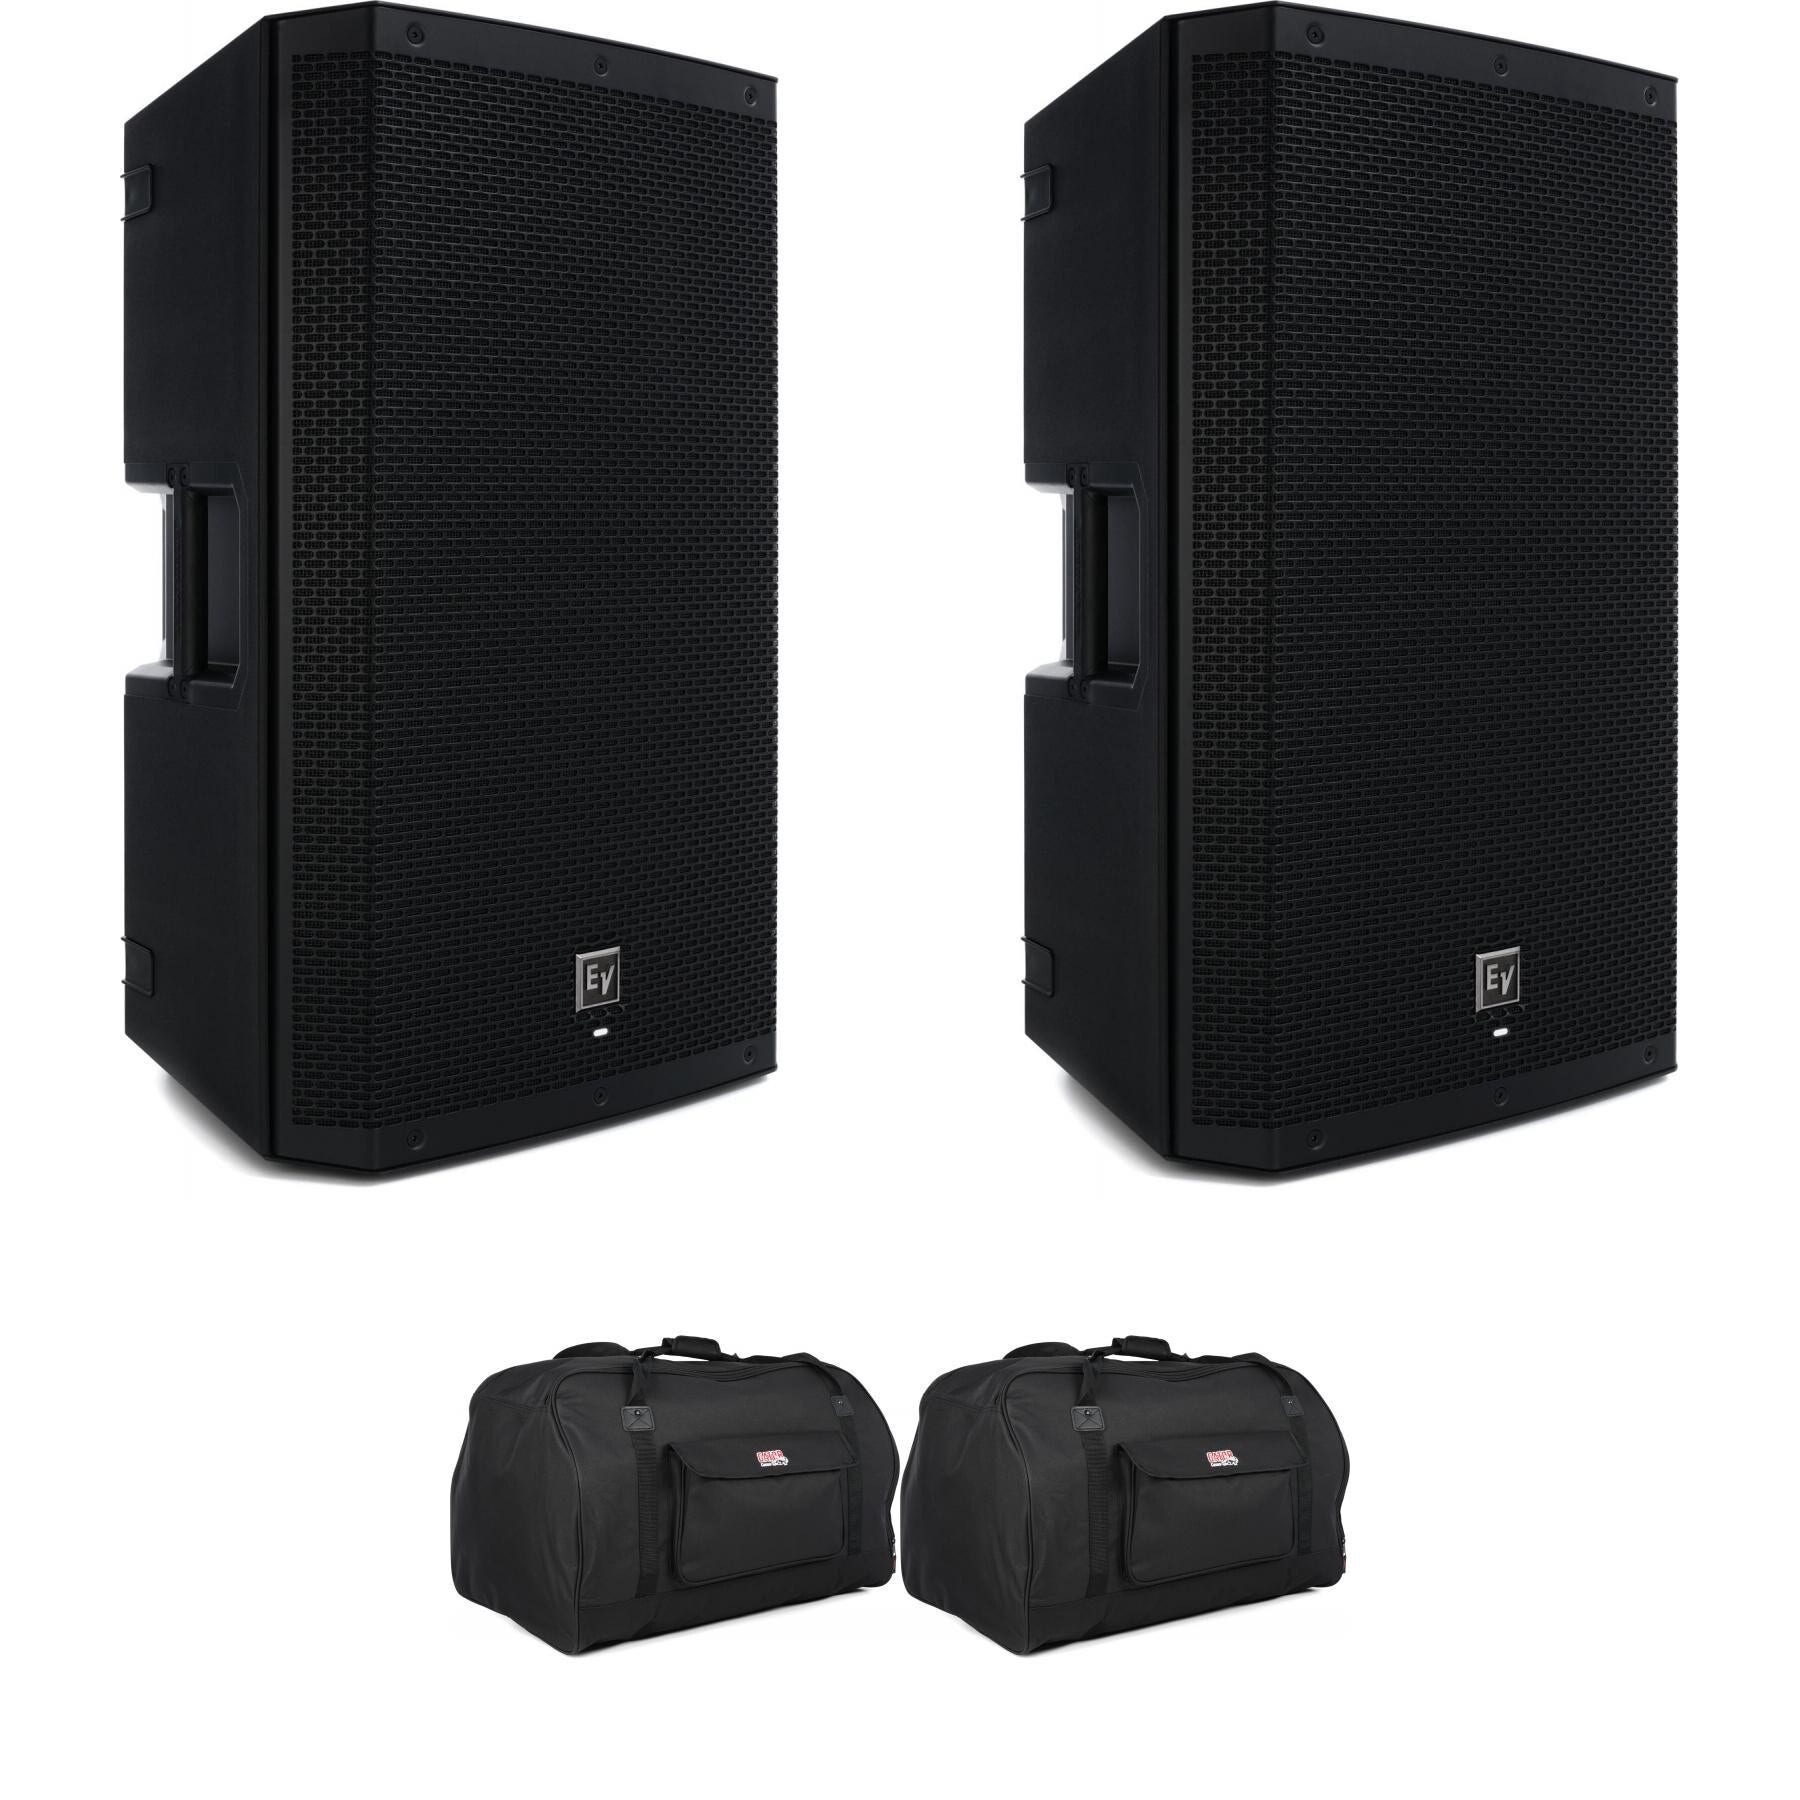 Electro Voice Zlx 15bt 1 000 Watt 15 Inch Powered Speaker With Bluetooth Pair With Bags Bundle